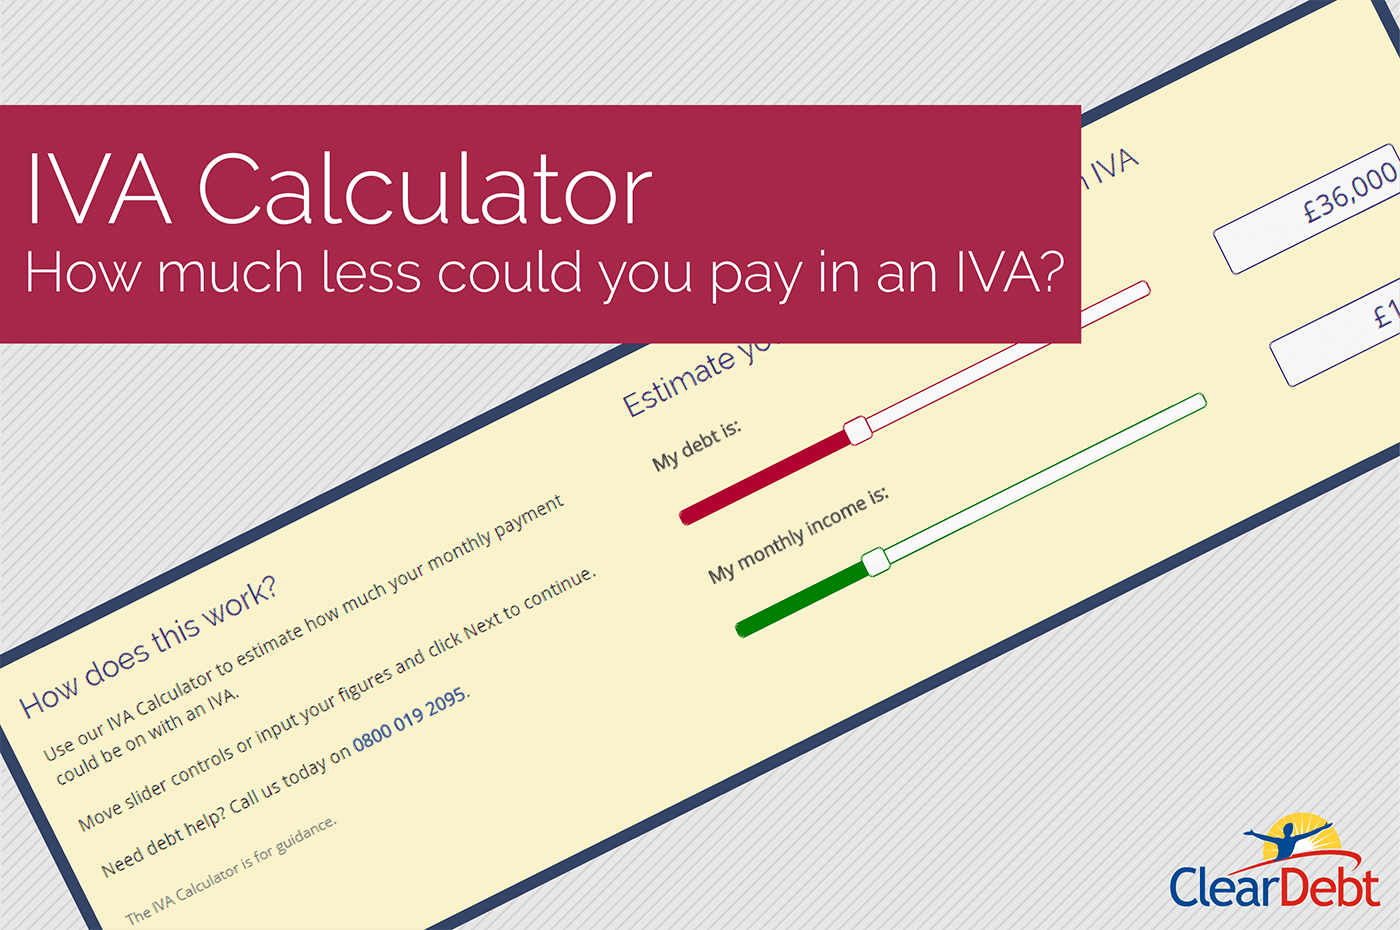 Aspirar Quinto hogar ClearDebt's IVA Calculator: how much less could you pay in an IVA